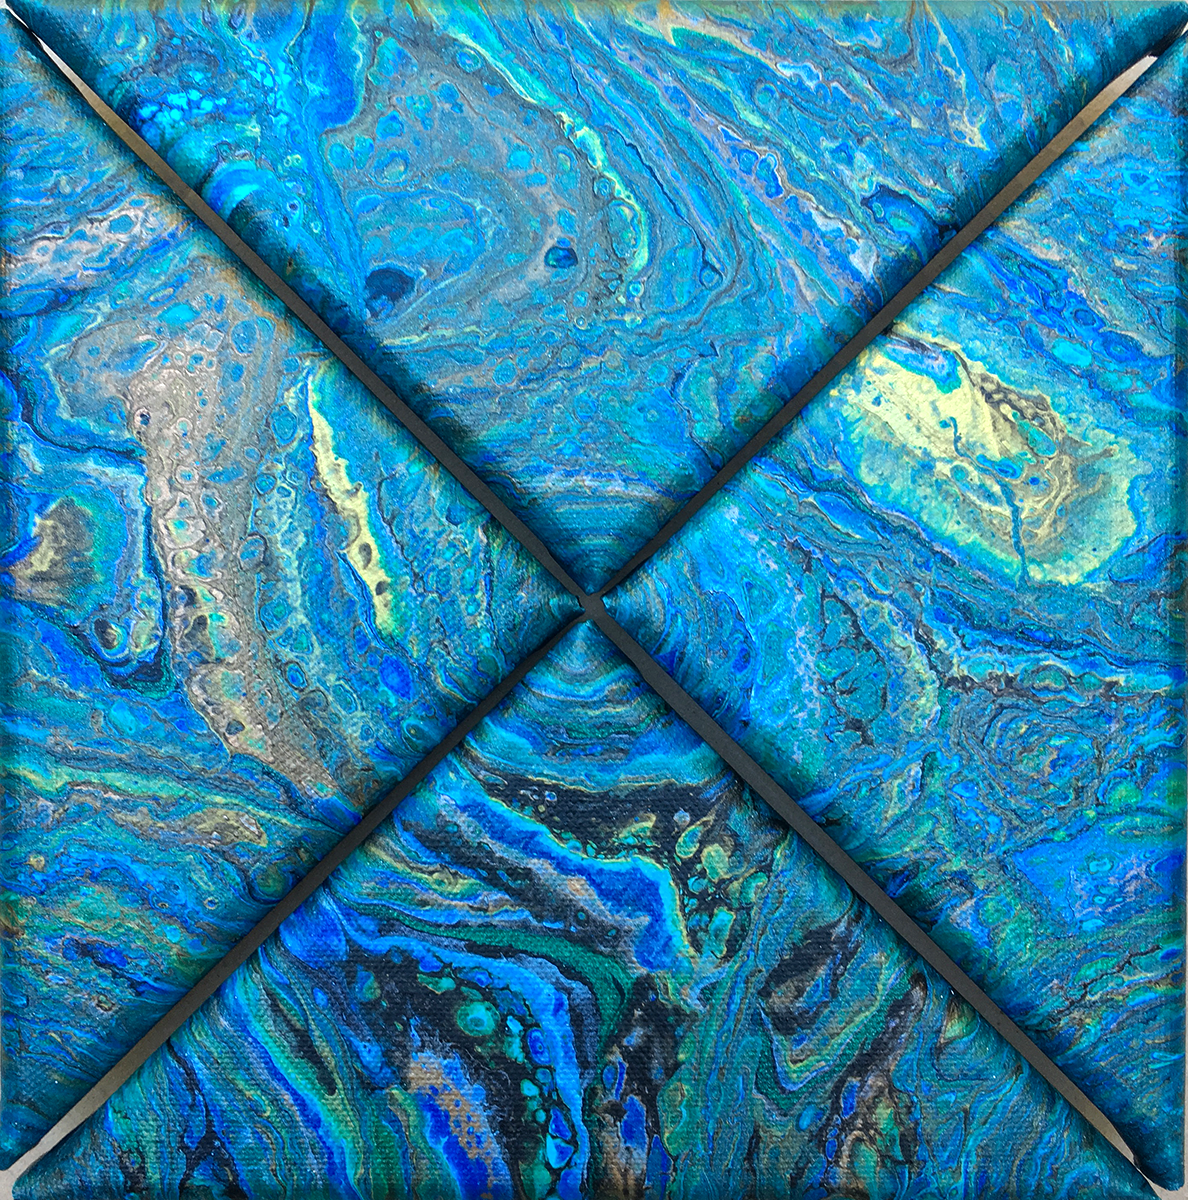 Poured acrylic by Lucy Arnold